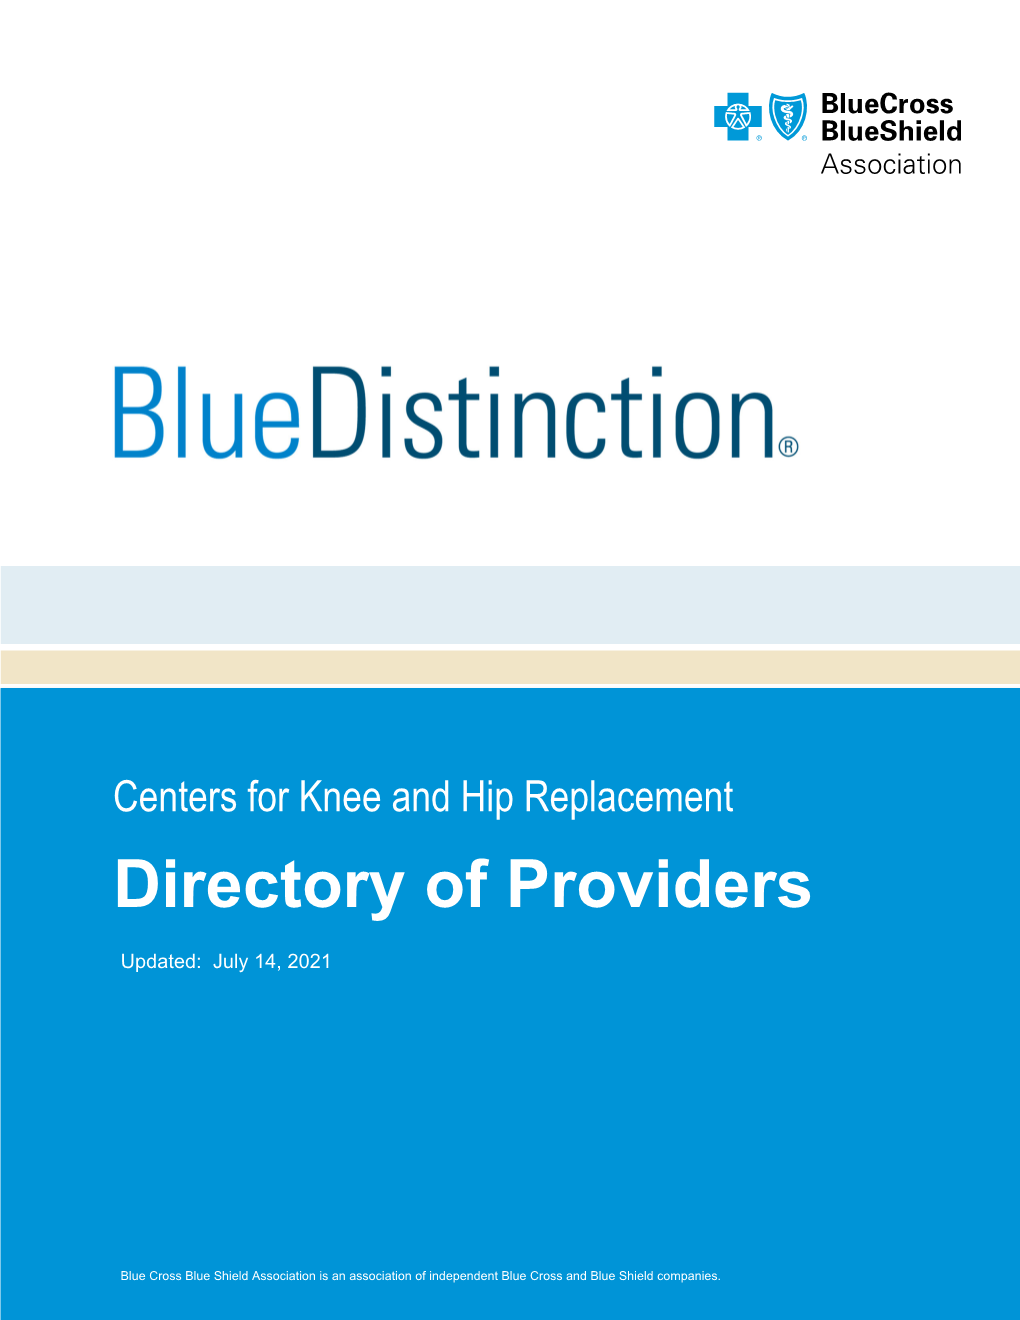 Centers for Knee and Hip Replacement Directory of Providers